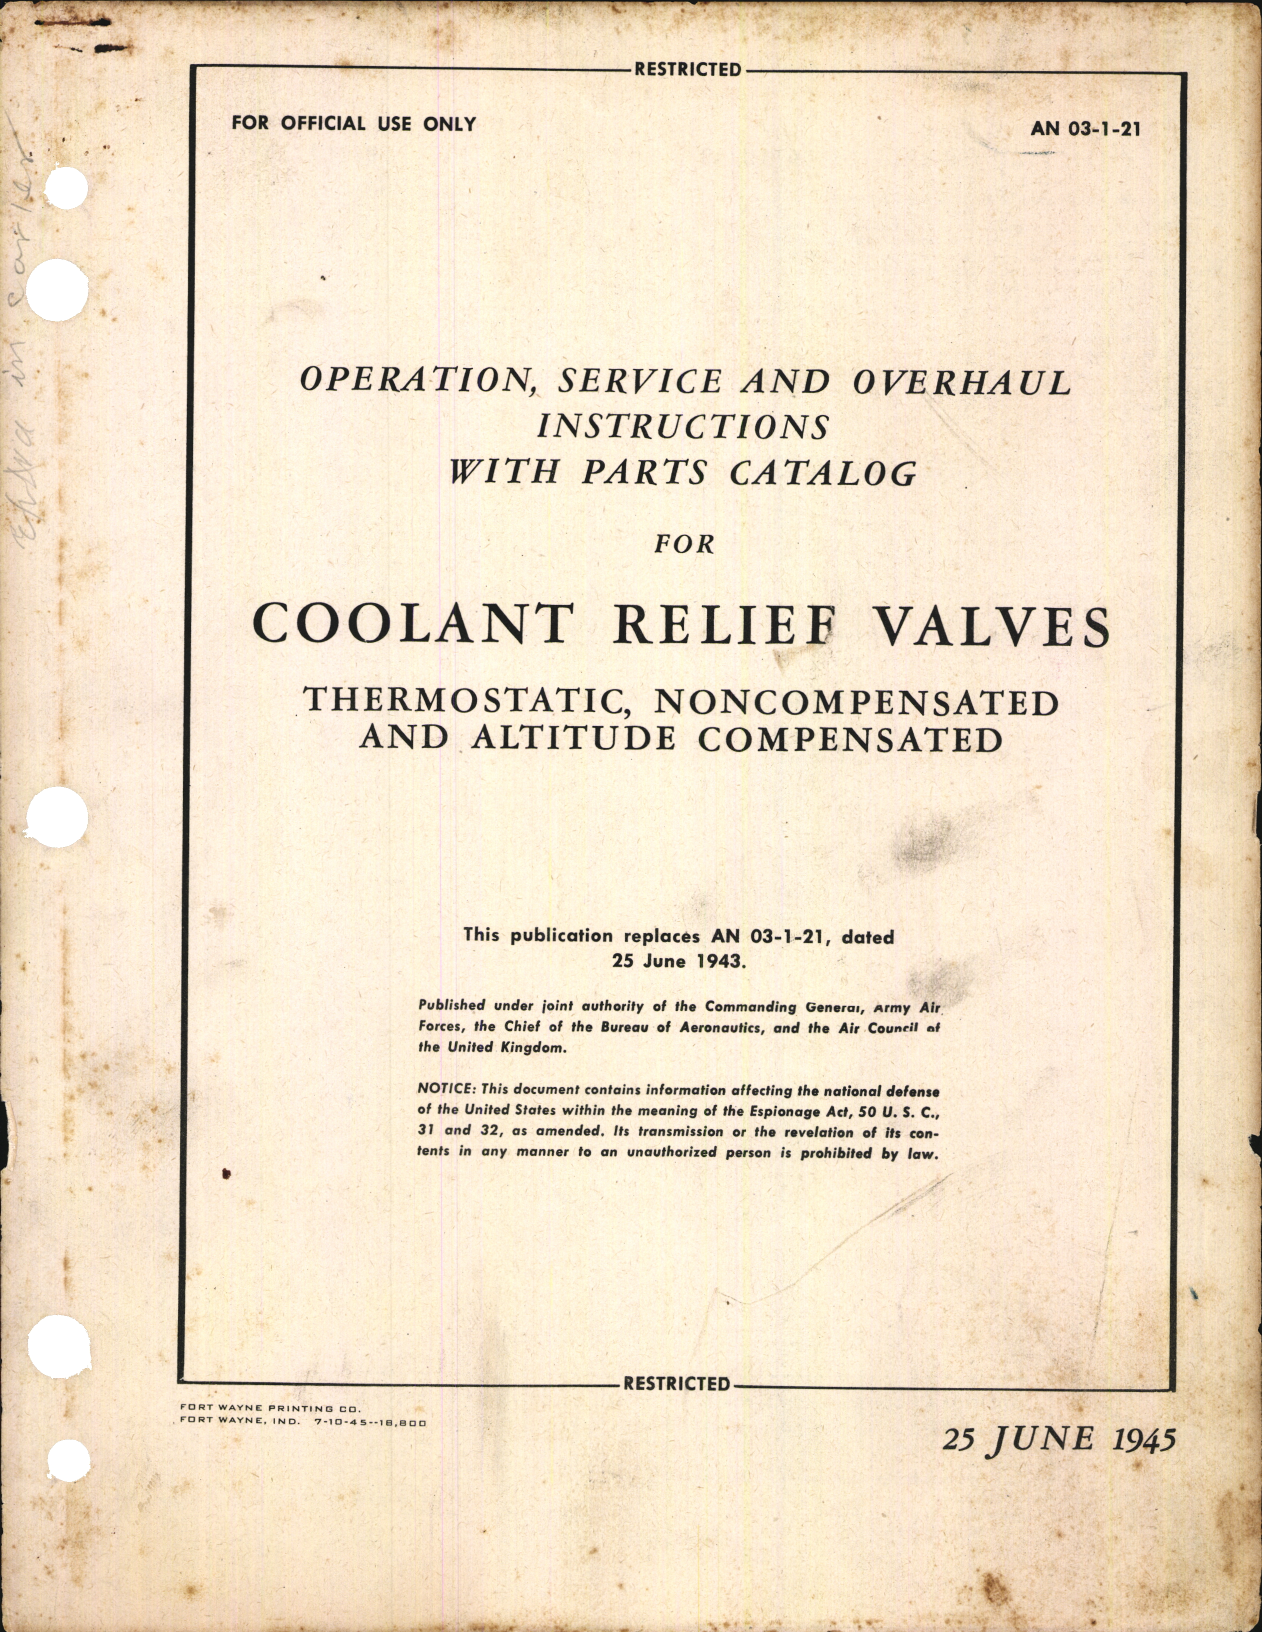 Sample page 1 from AirCorps Library document: Operation, Service and Overhaul Instructions with Parts Catalog for Coolant Relief Valves